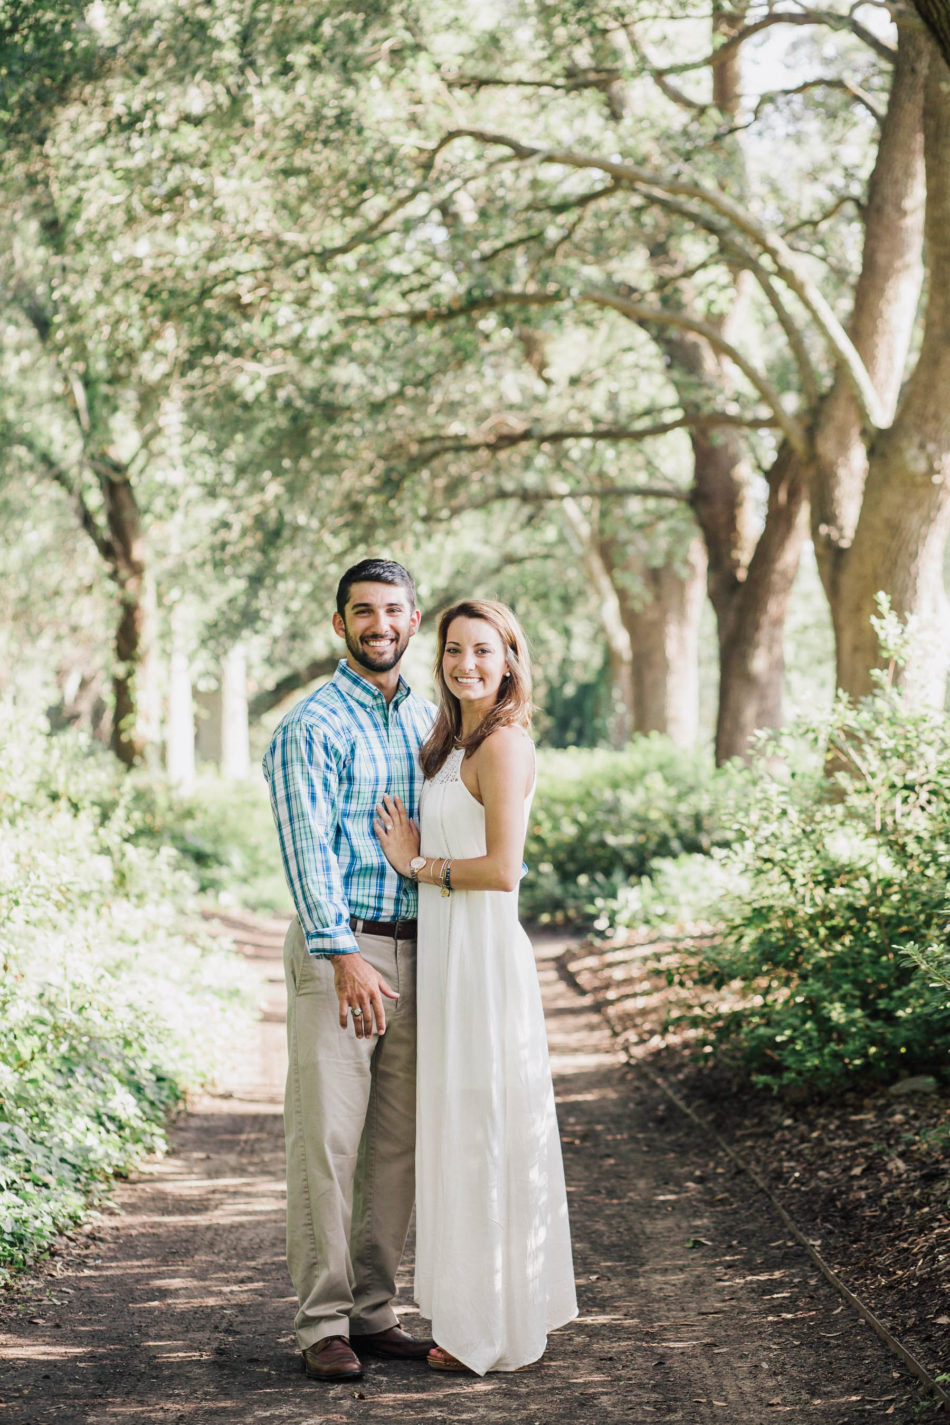 Engaged couple stand in path of oak trees, Hampton Park, Charleston, South Carolina Kate Timbers Photography. http://katetimbers.com #katetimbersphotography // Charleston Photography // Inspiration